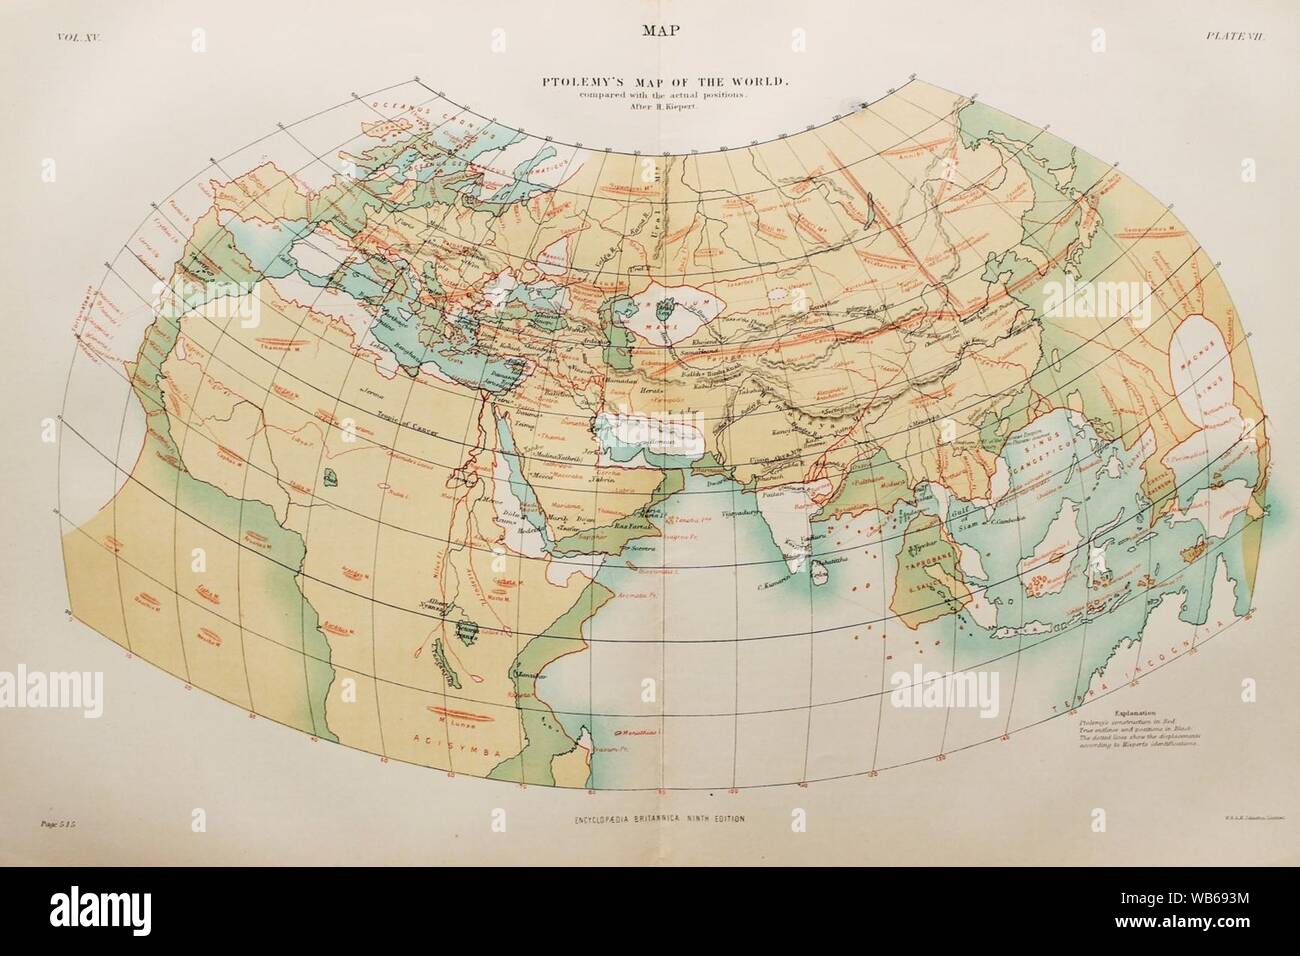 EB9 Map Plate VII Ptolemy's Map of the World. Stock Photo